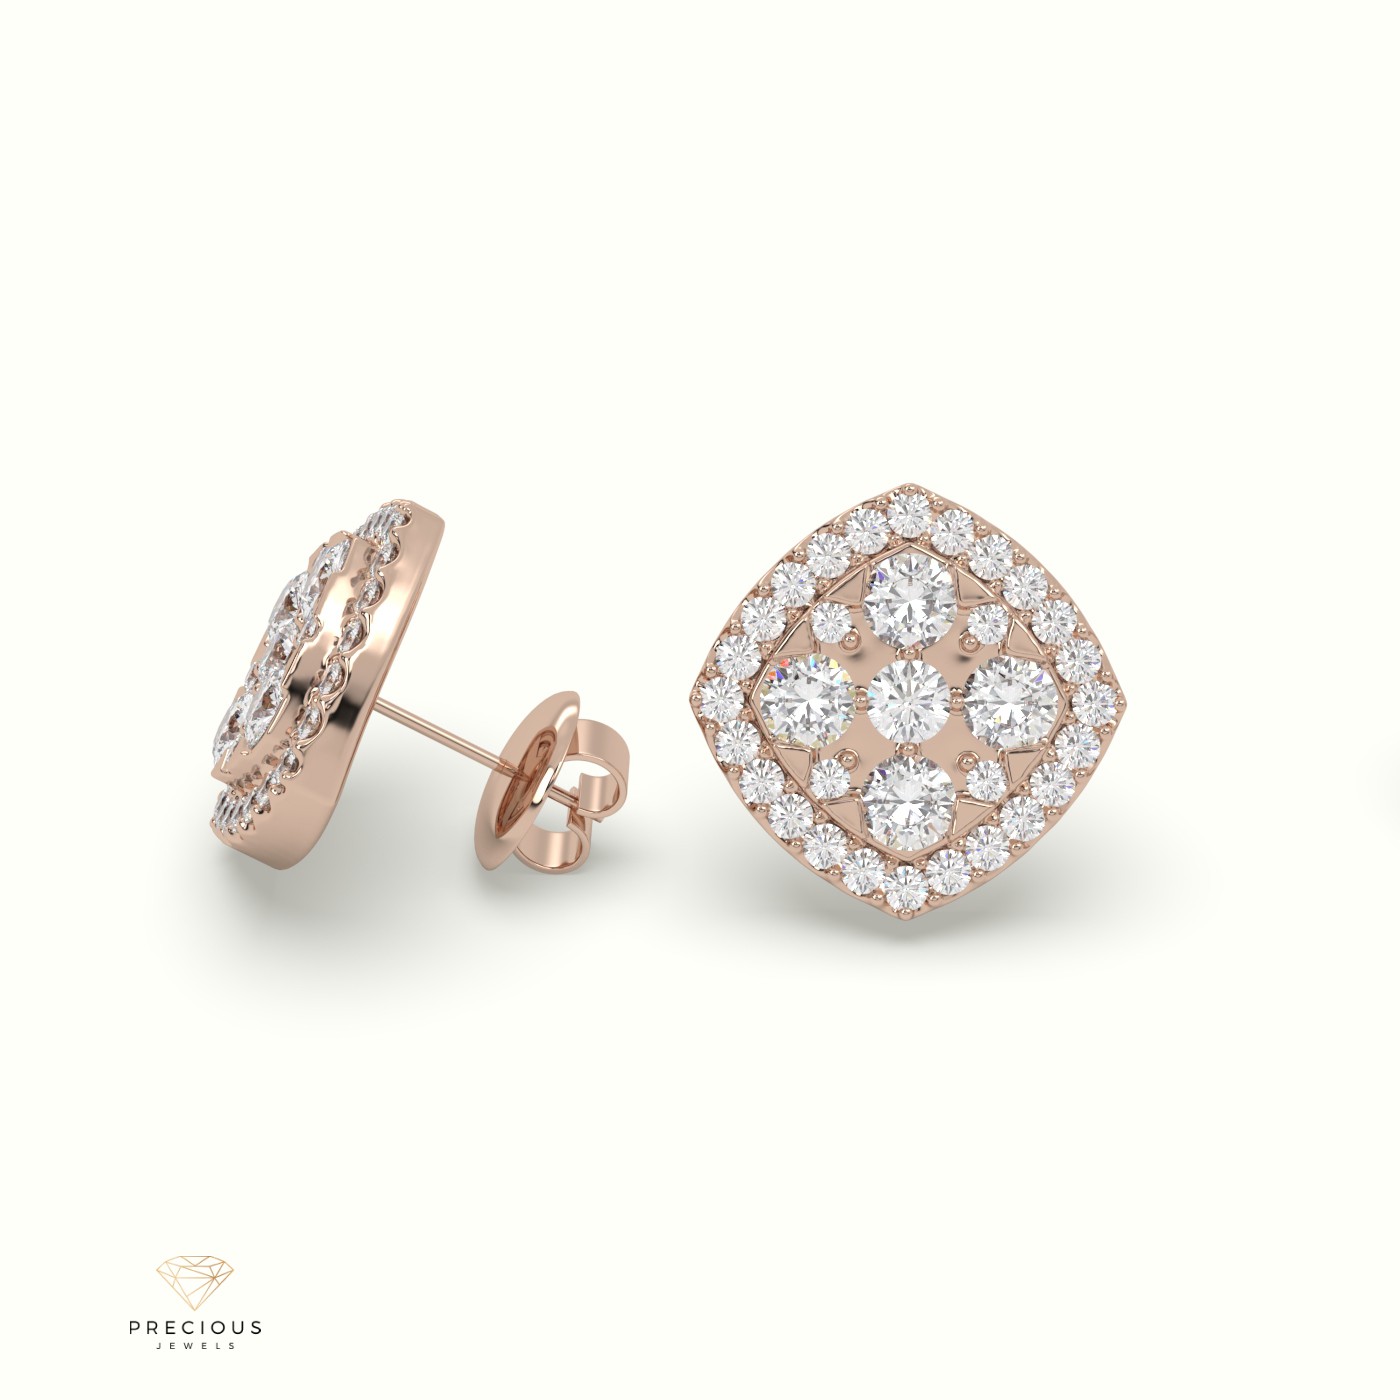 18k rose gold rounded square diamond cluster earrings Photos & images